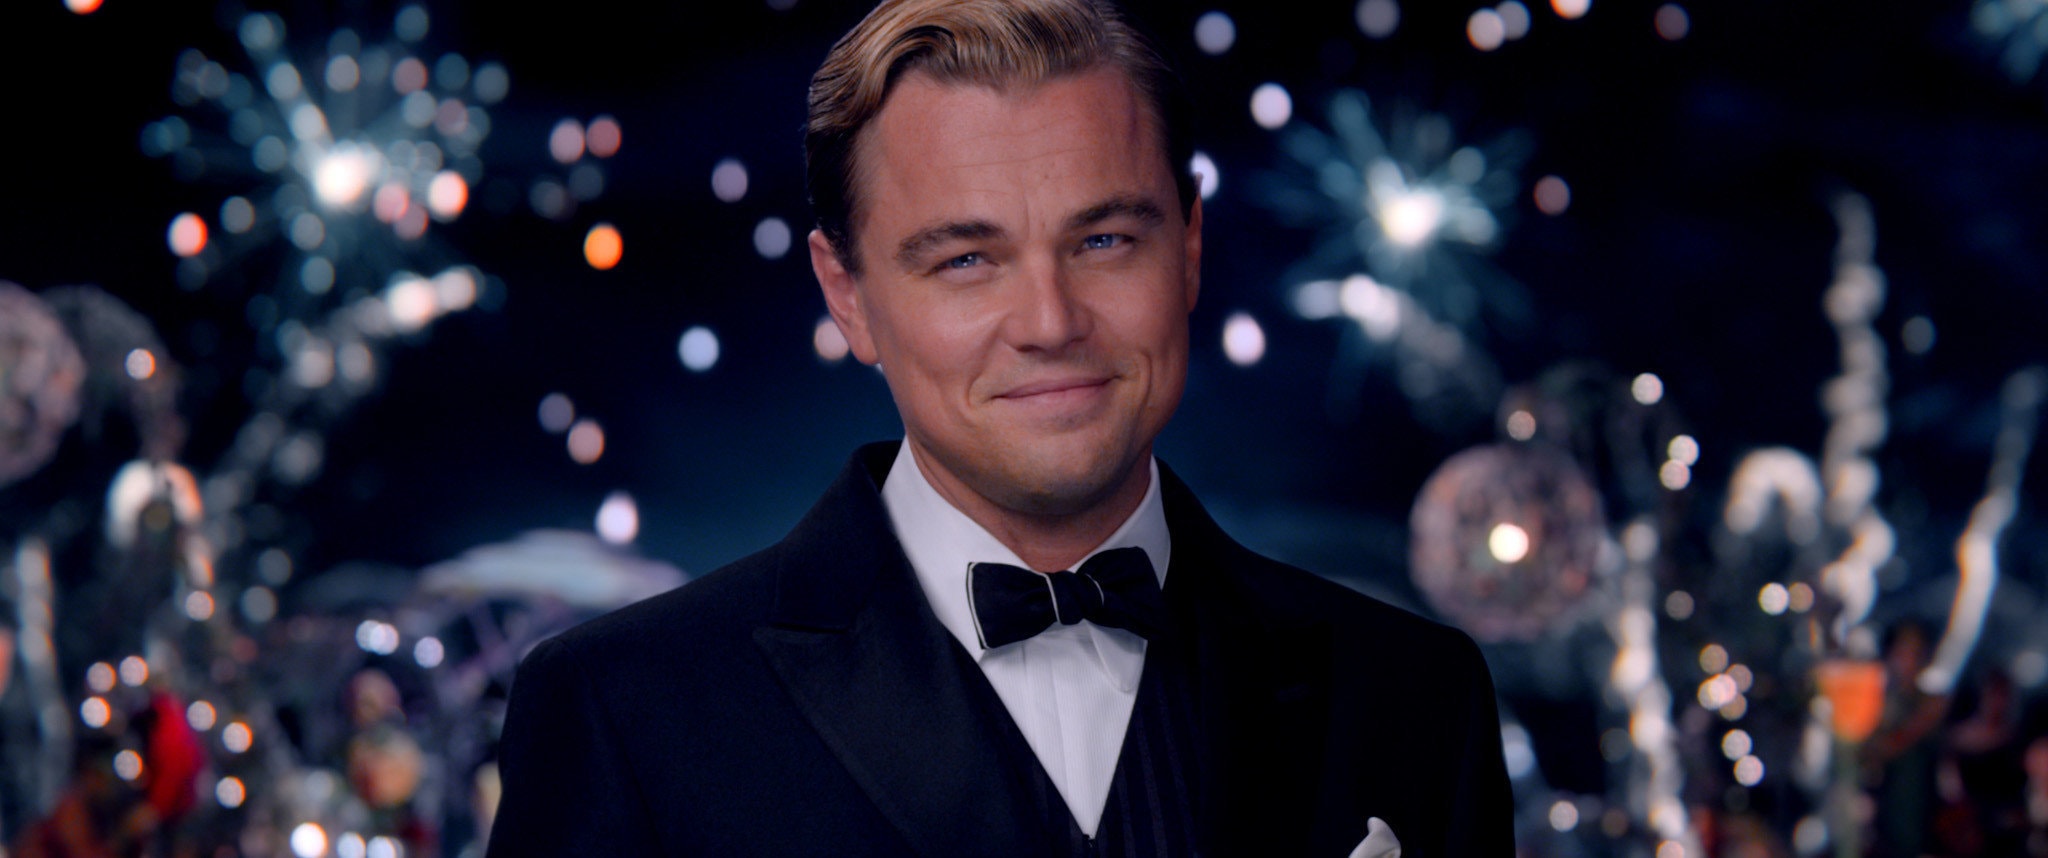 the-great-gatsby_eb7d08ca